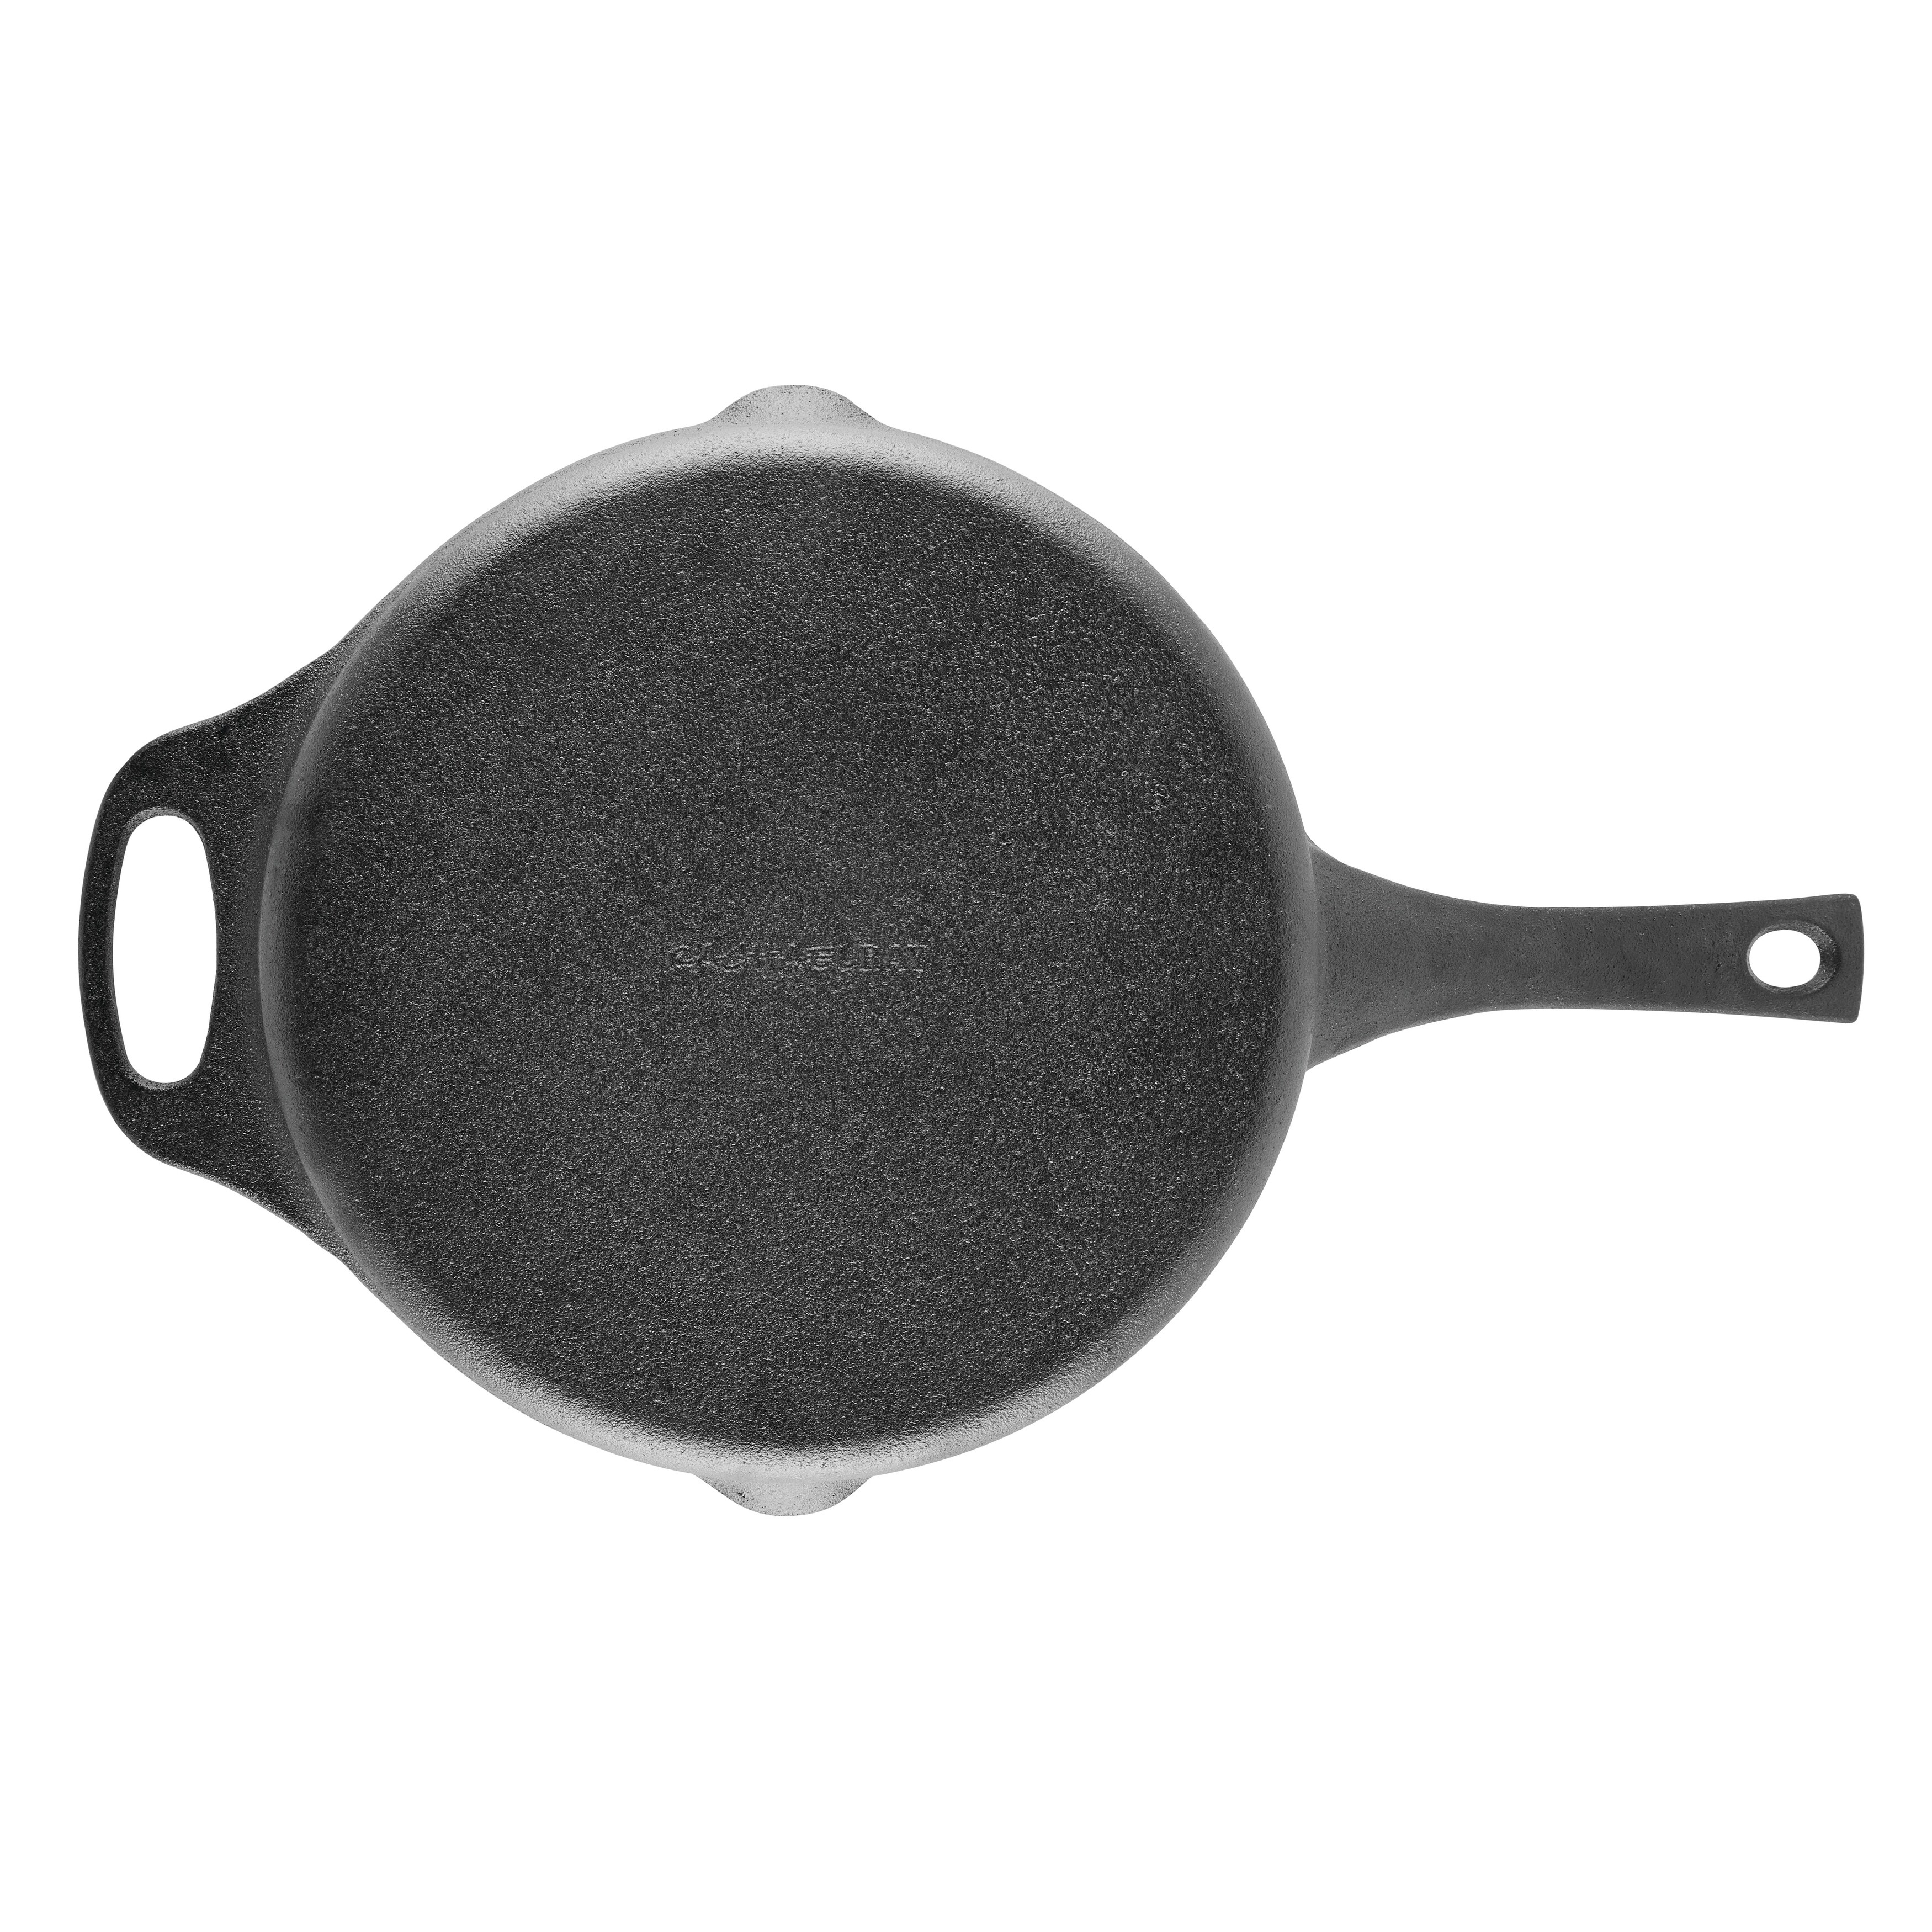 https://ak1.ostkcdn.com/images/products/is/images/direct/d264e946407930991fbcef8b36f989e538e96be6/Rachael-Ray-Cast-Iron-Pre-seasoned-Skillet%2C-10in.jpg